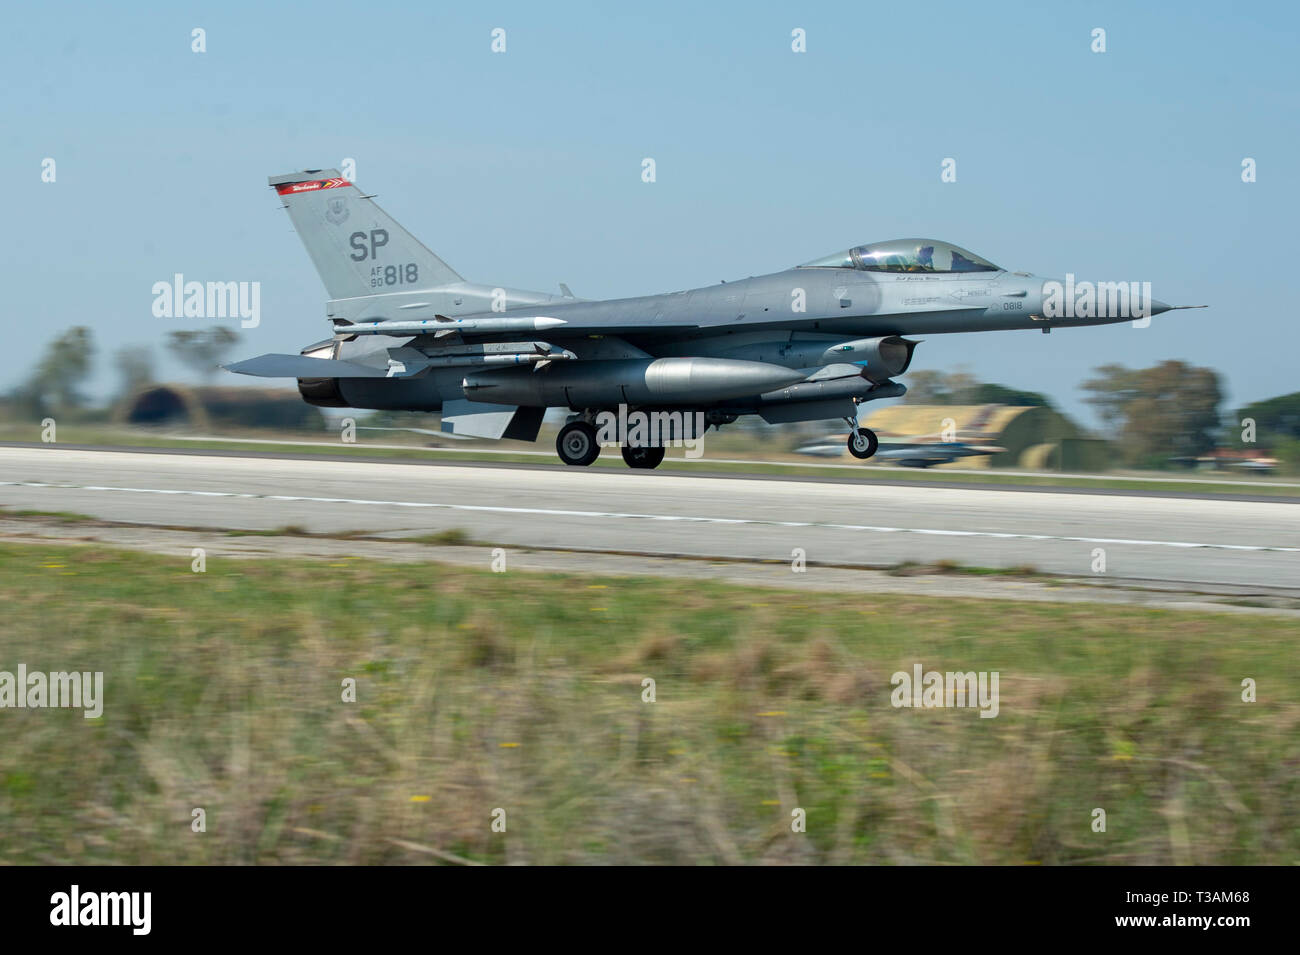 A U.S. Air Force F-16 Fighting Falcon assigned to the 480th Expeditionary Fighter Squadron takes off during exercise INIOCHOS 19 at Andravida Air Base, Greece, April 3, 2019. The 480th EFS participation helps to enhance interoperability and maintain joint readiness with the participating allies and partner nations. (U.S. Air Force photo by Airman 1st Class Branden Rae) Stock Photo